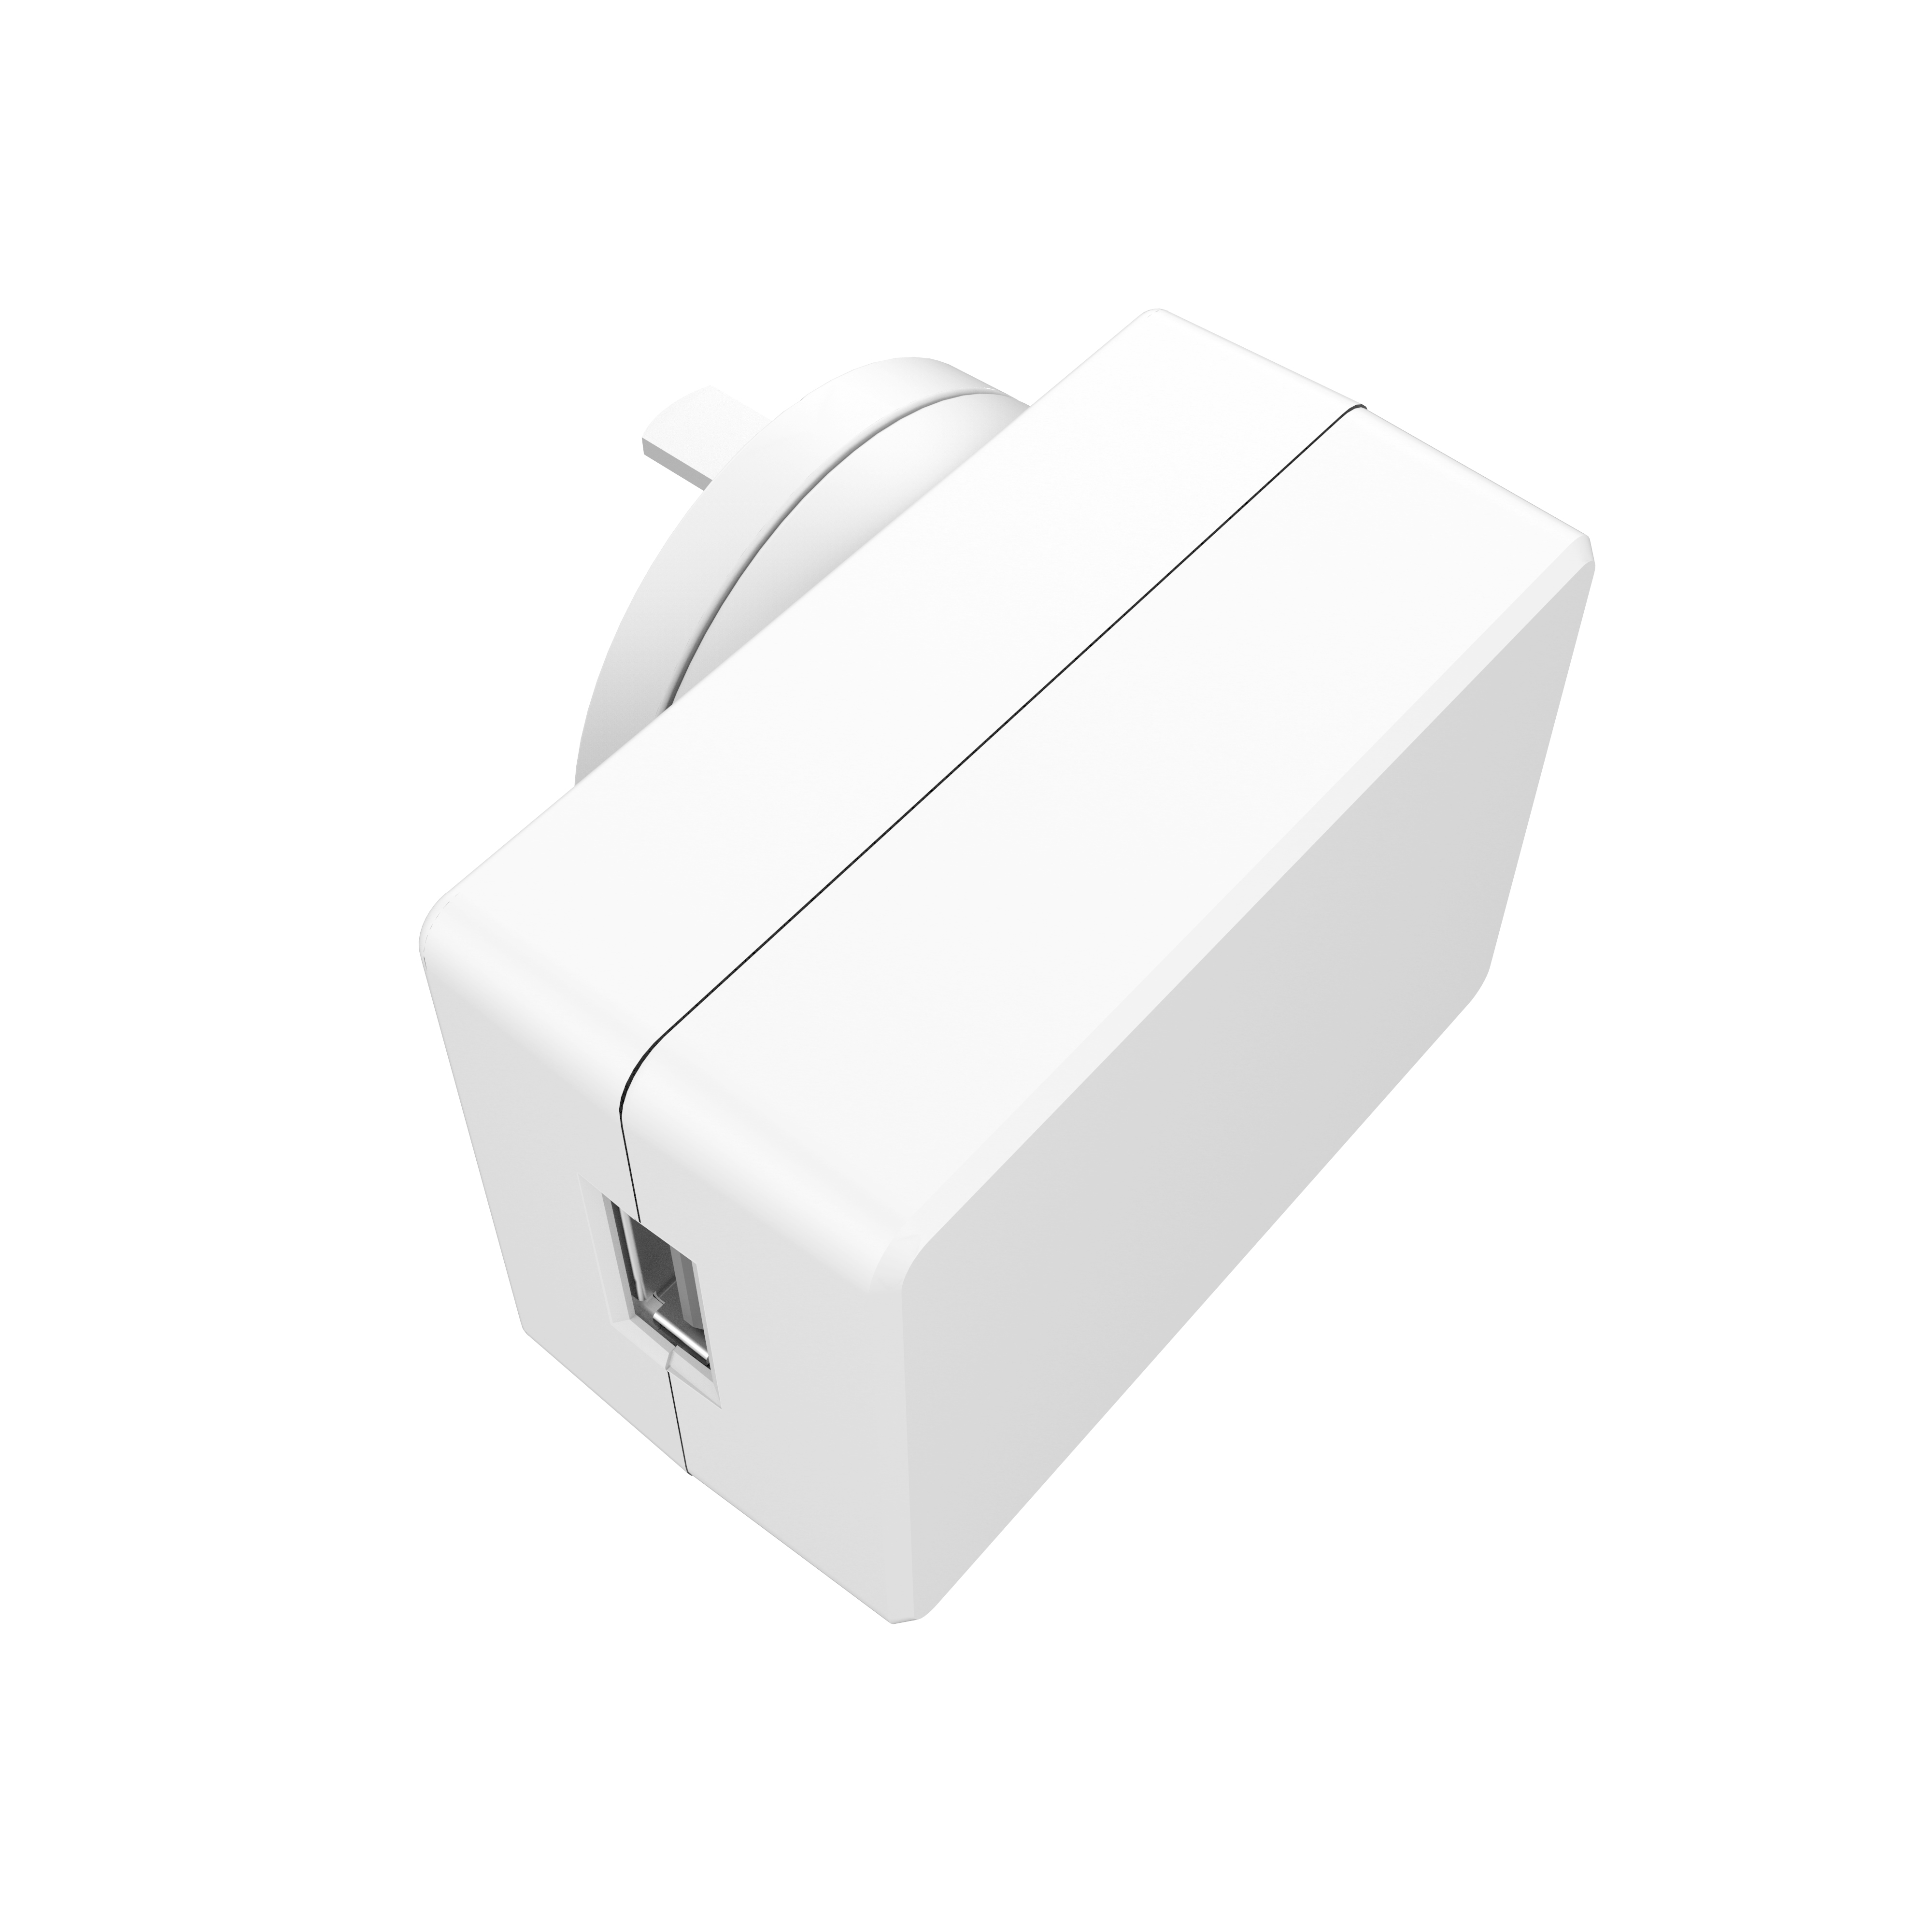 White 5V 2A 2.5A 3A BIS US EU UK AU PSE JP Power Adapter SMPS Indian Switching Power Supply USB Adaptor Charger UL ECAS ETL BIS